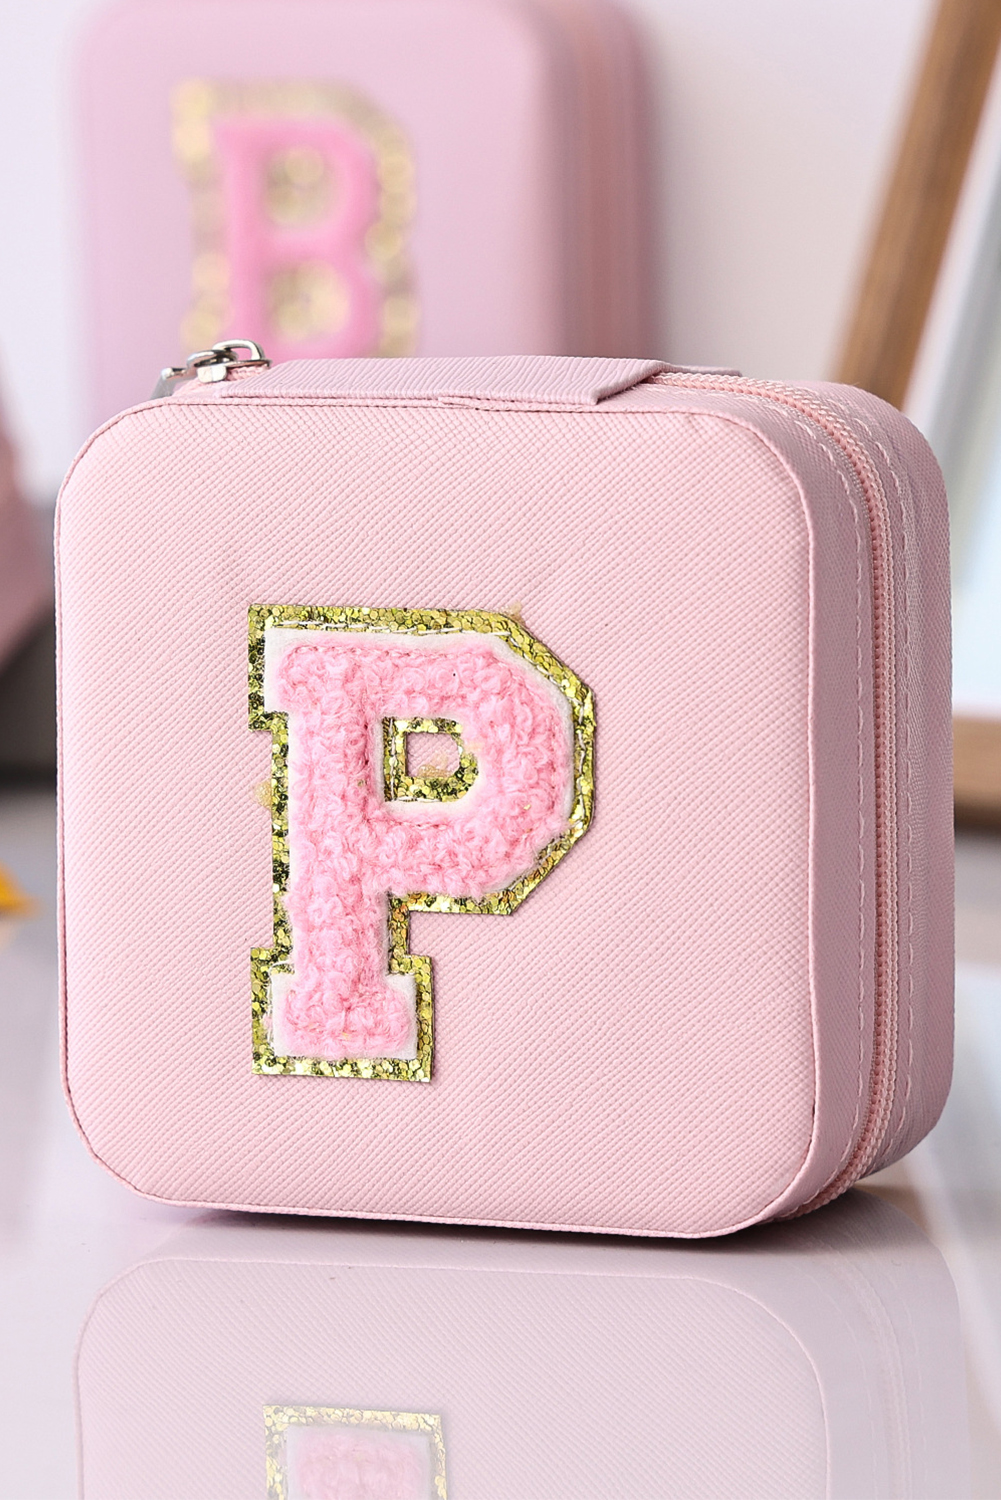 Shewin Wholesale Distributor Pink Chenille P Patch Small JEWELRY Box